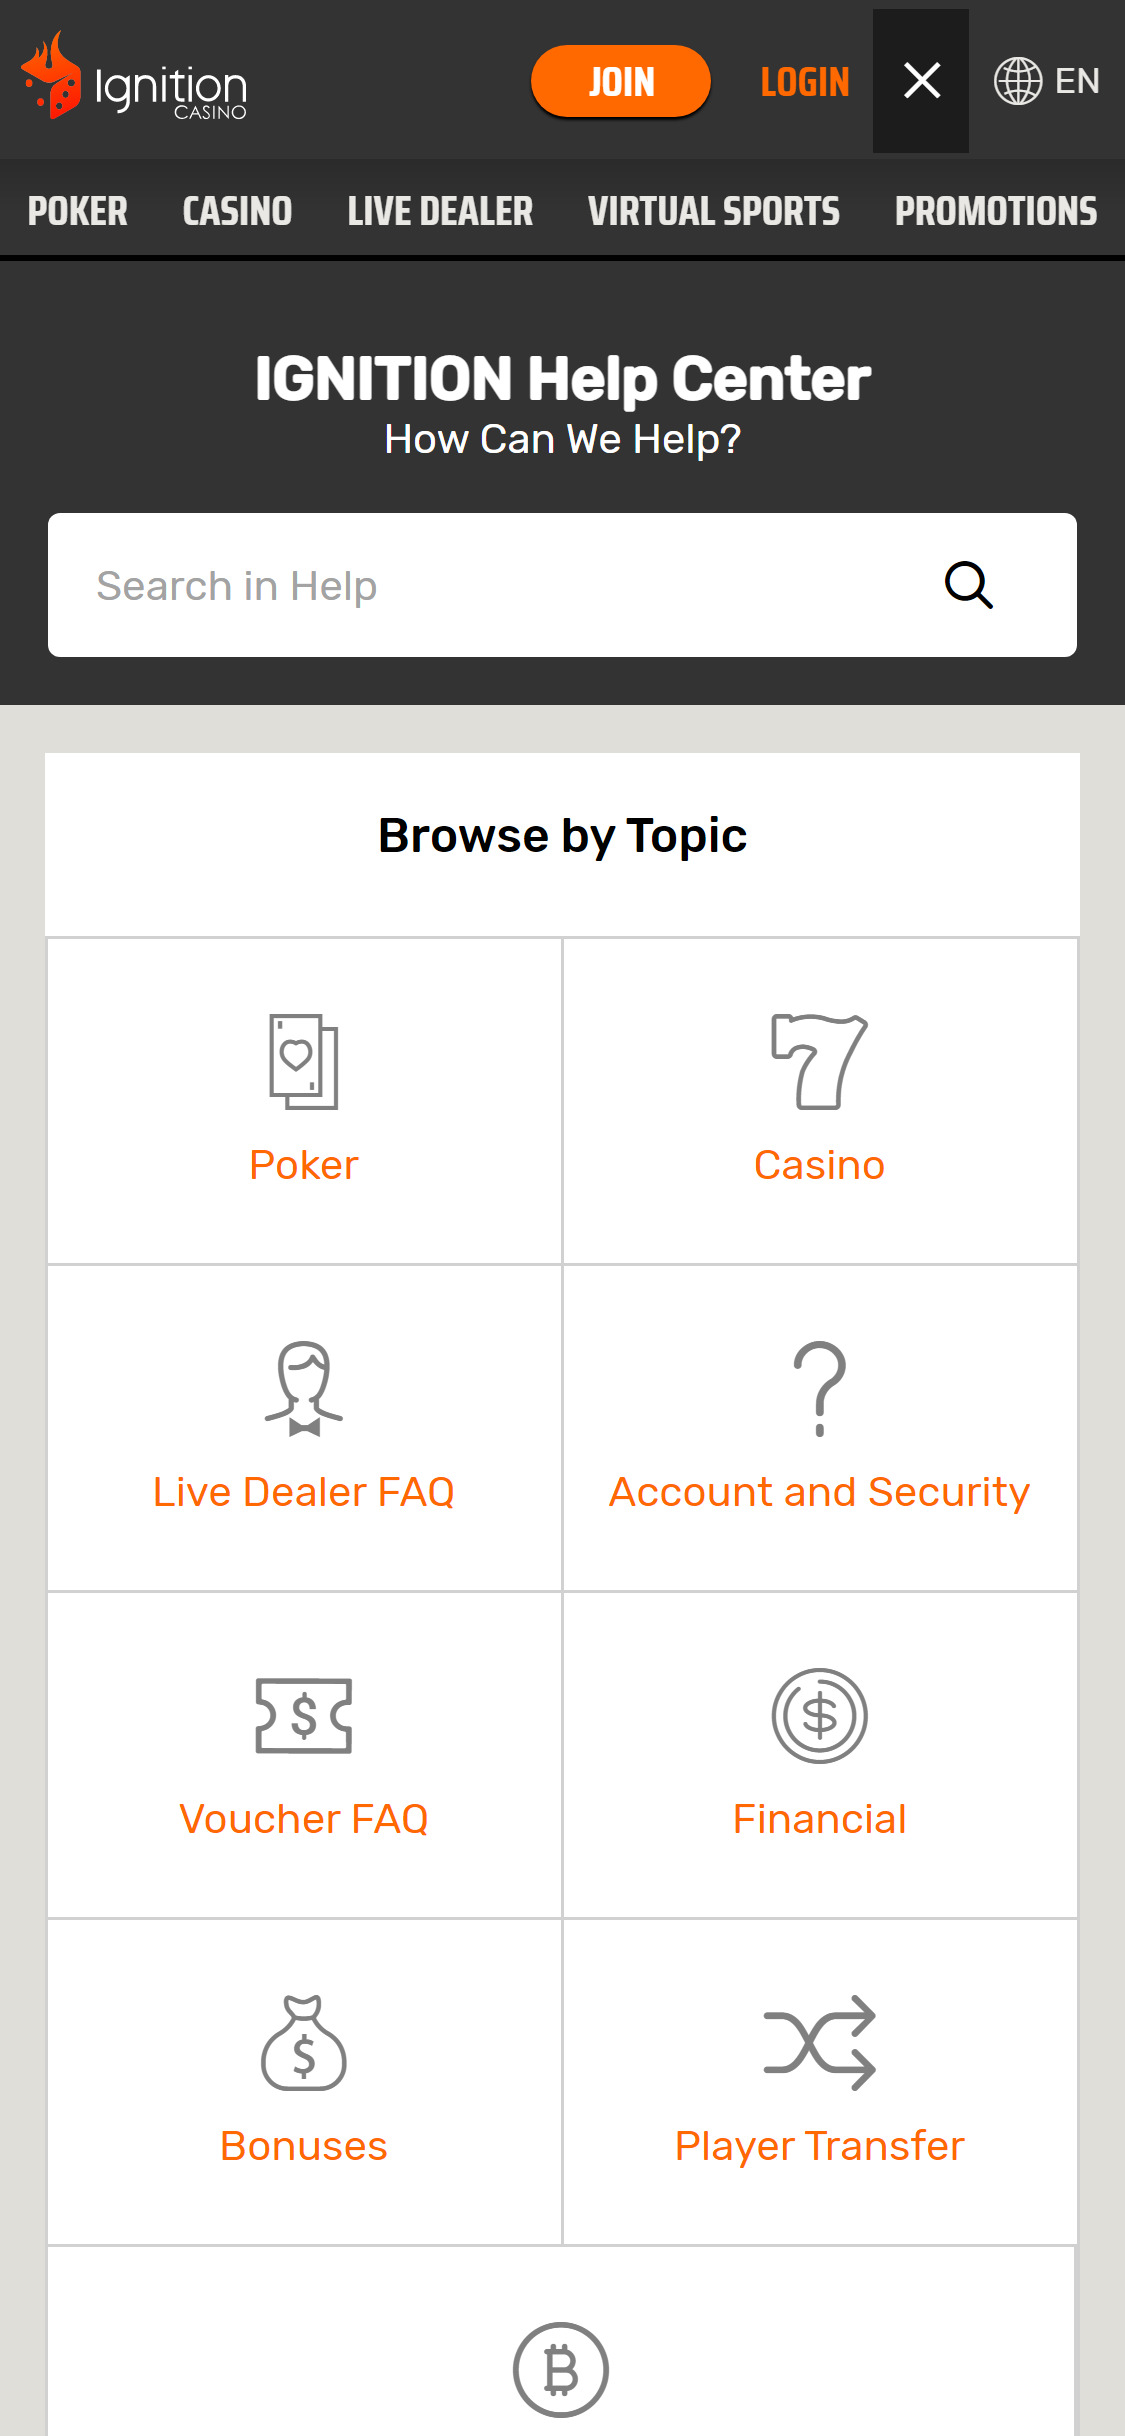 Ignition Casino Mobile Support Review